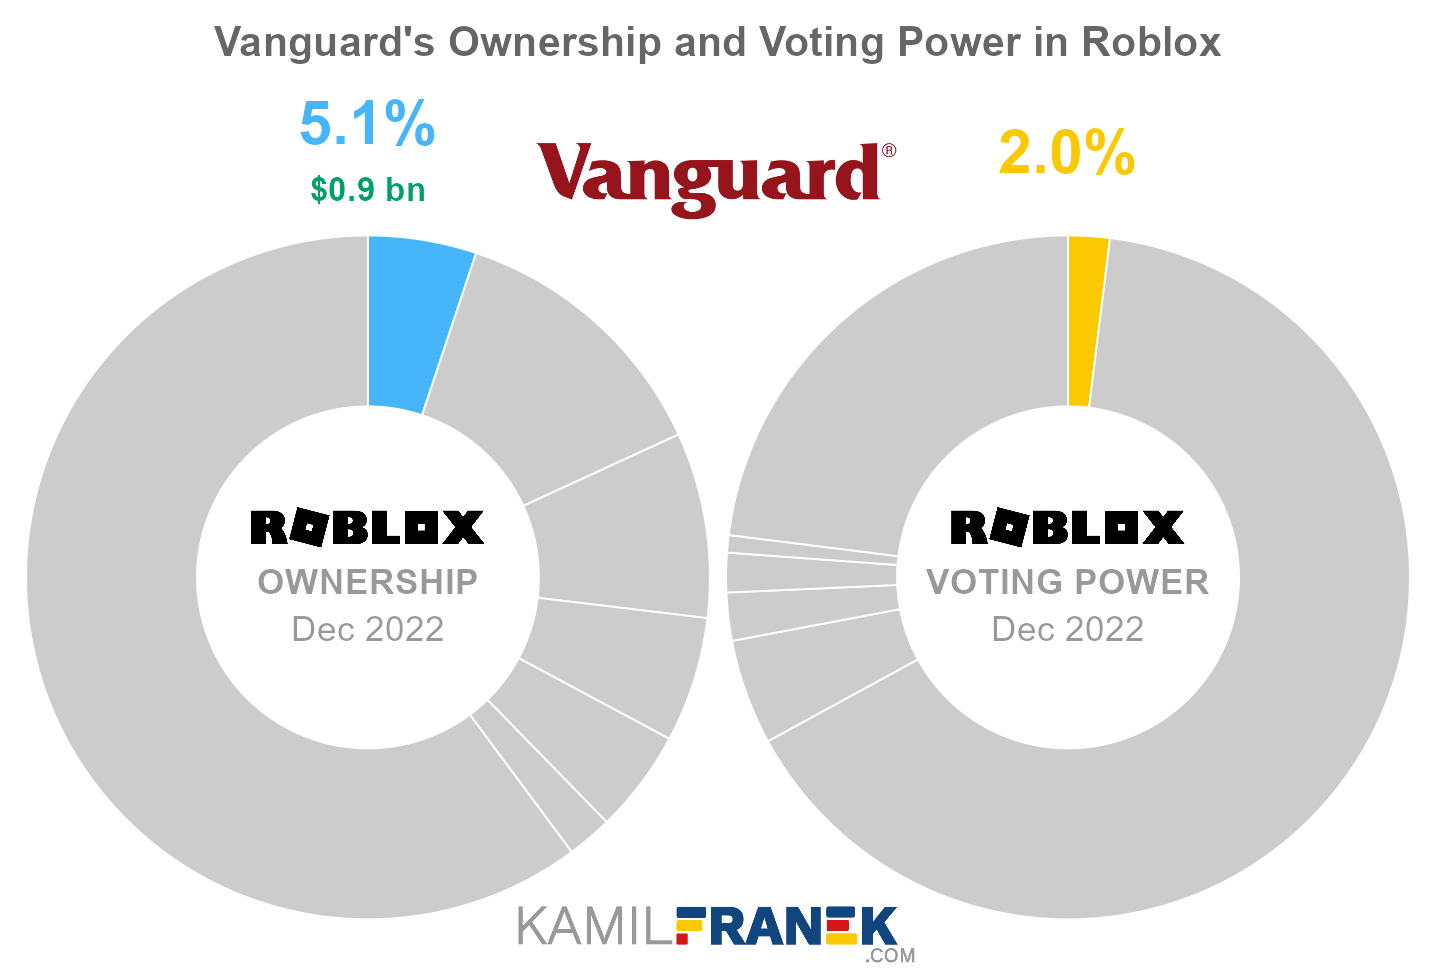 Vanguard's share ownership and voting power in Roblox (chart)